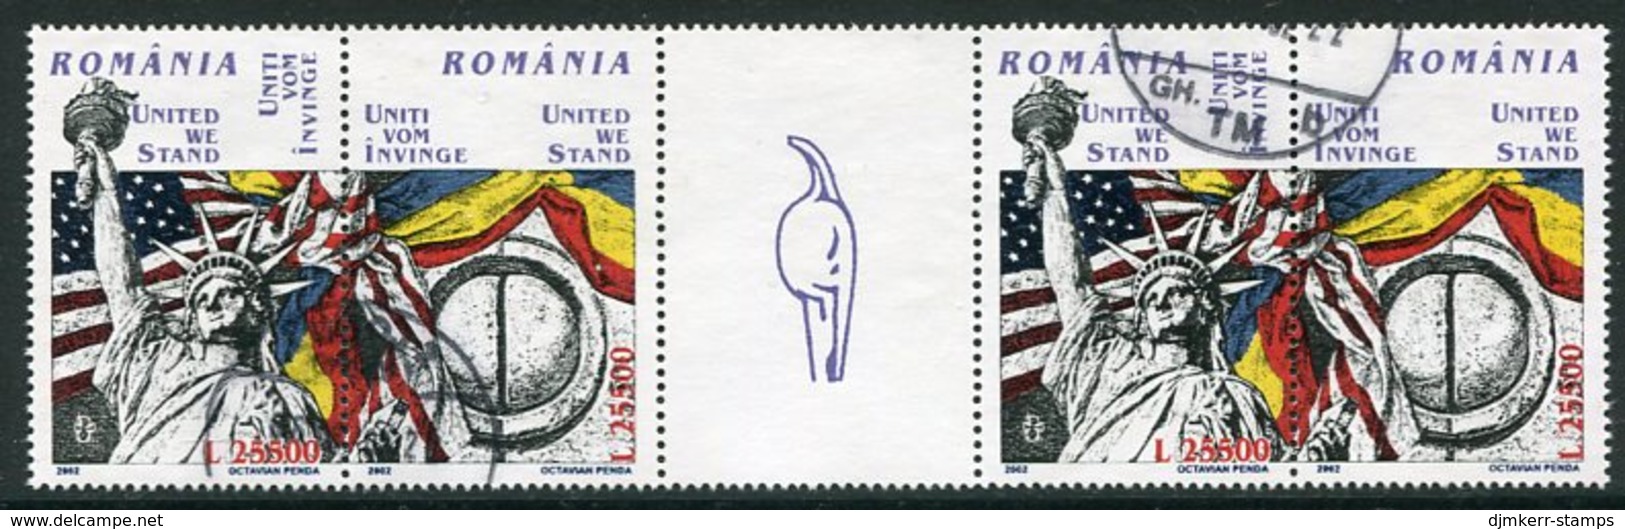 ROMANIA 2002 Commemoration Of New York Terror Attack  Strip Used.  Michel 5647-48 Zf - Used Stamps